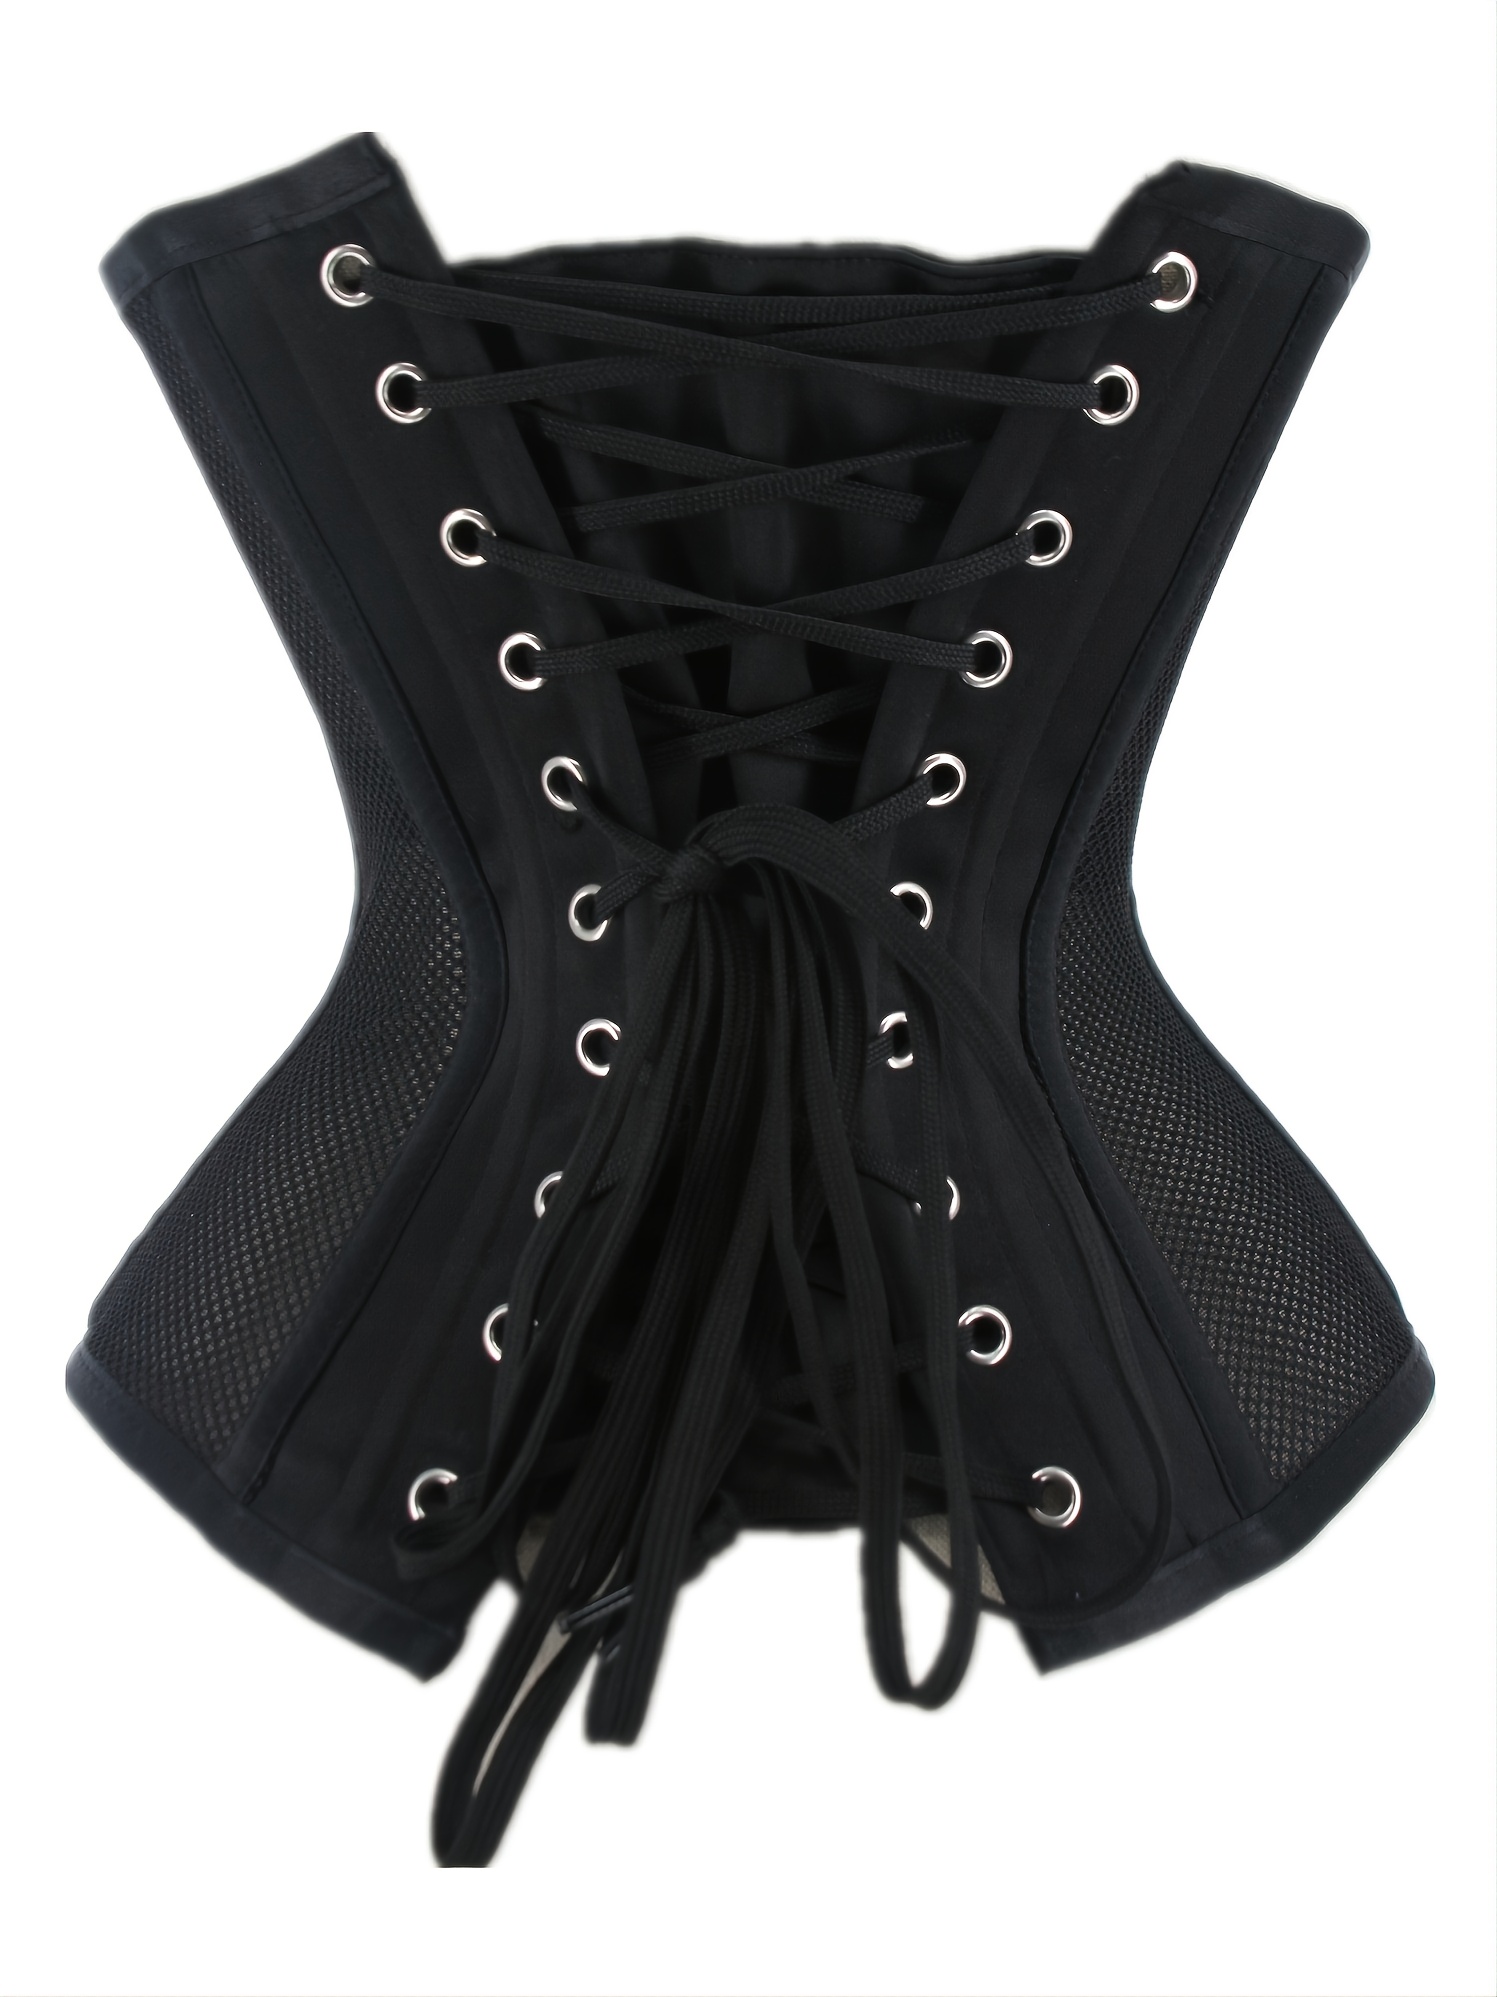 BrilliantMe Women's Push Up Corsets Strapless Lace Up Bustiers Shapewear  Waist Trainer Black S